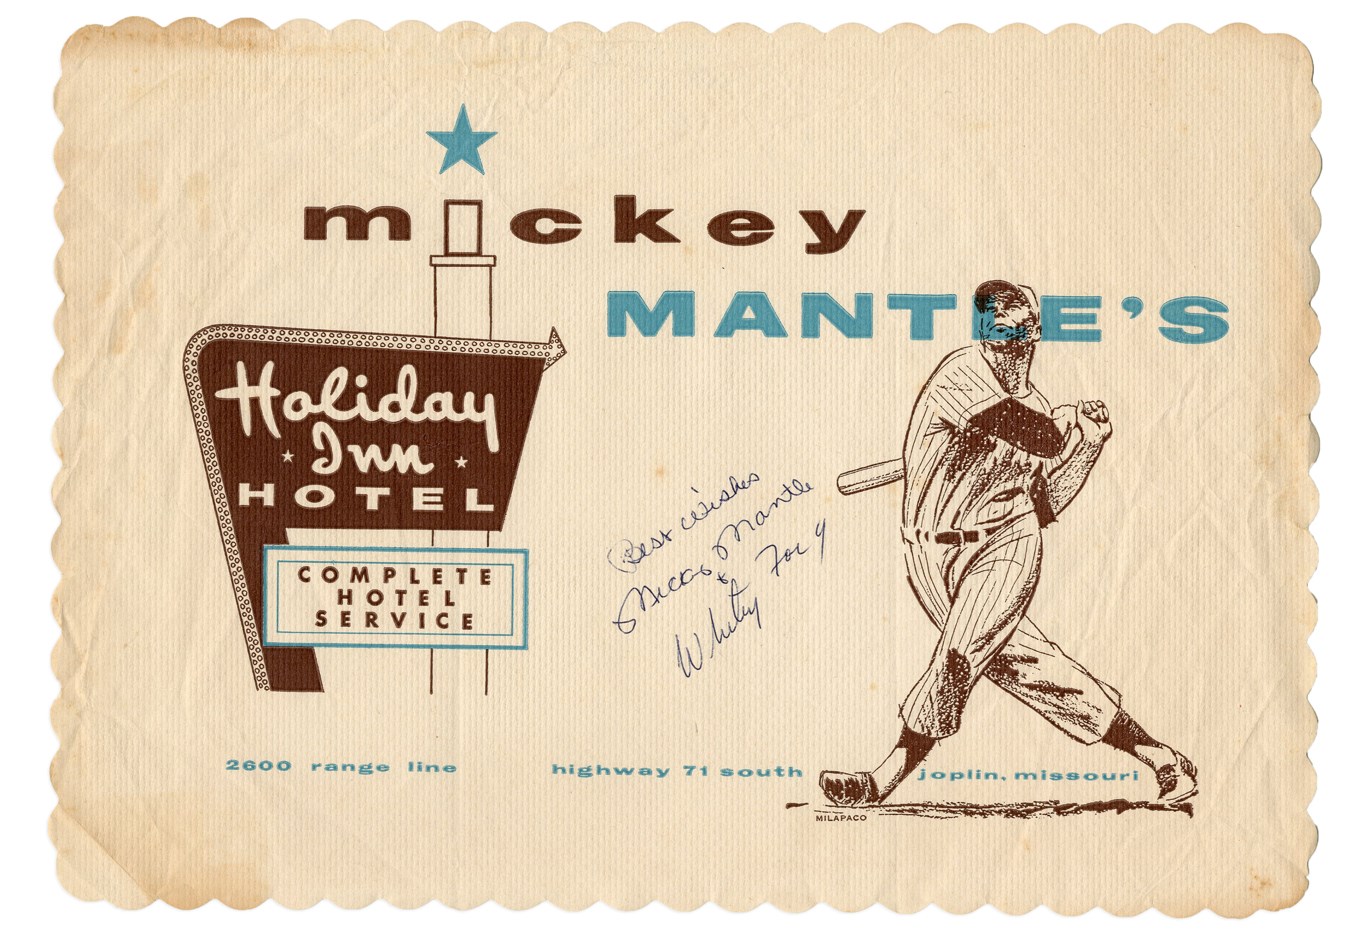 1960s Mickey Mantle & Whitey Ford Signed Joplin Holiday Inn Restaurant Placemat (PSA/DNA)